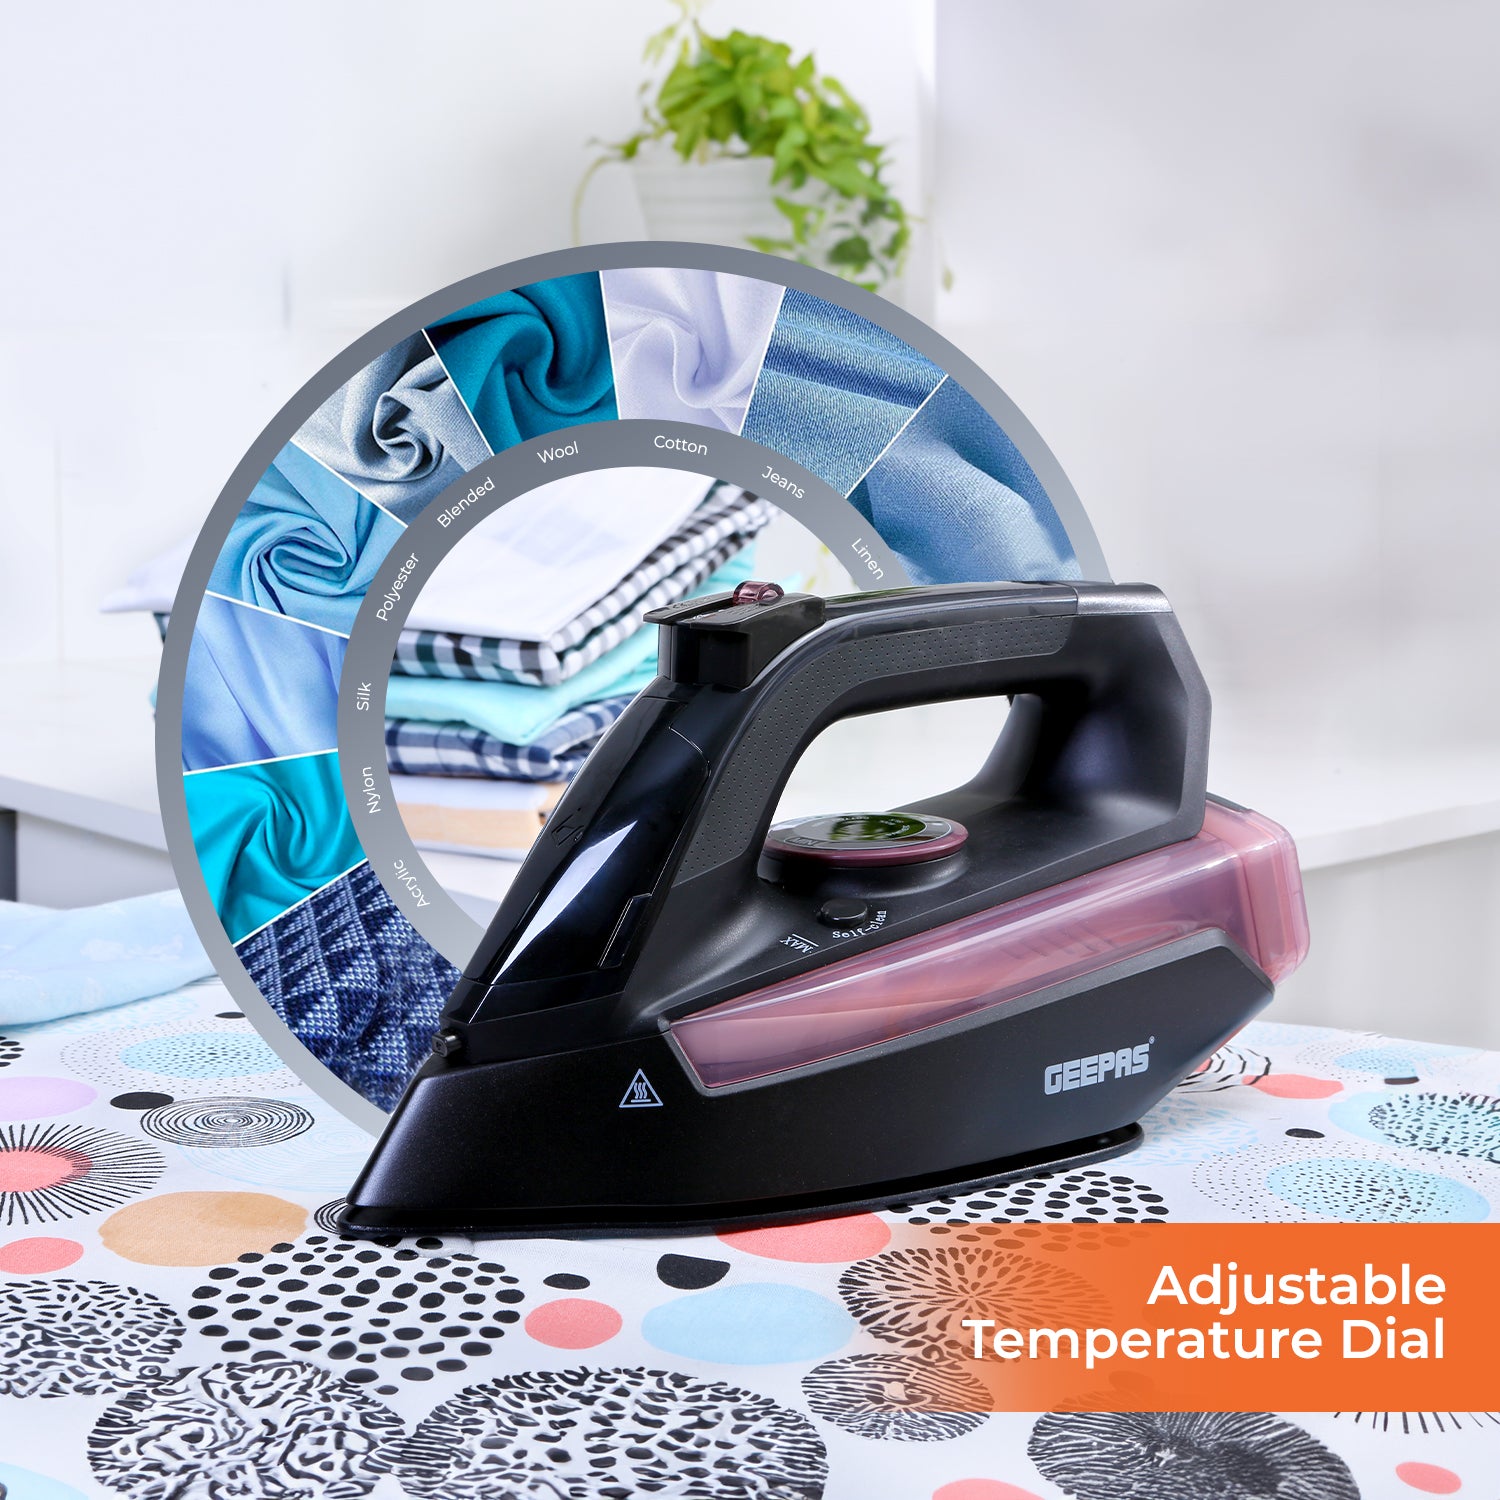 2-In-1 Ceramic Steam Wet and Dry Clothes Iron